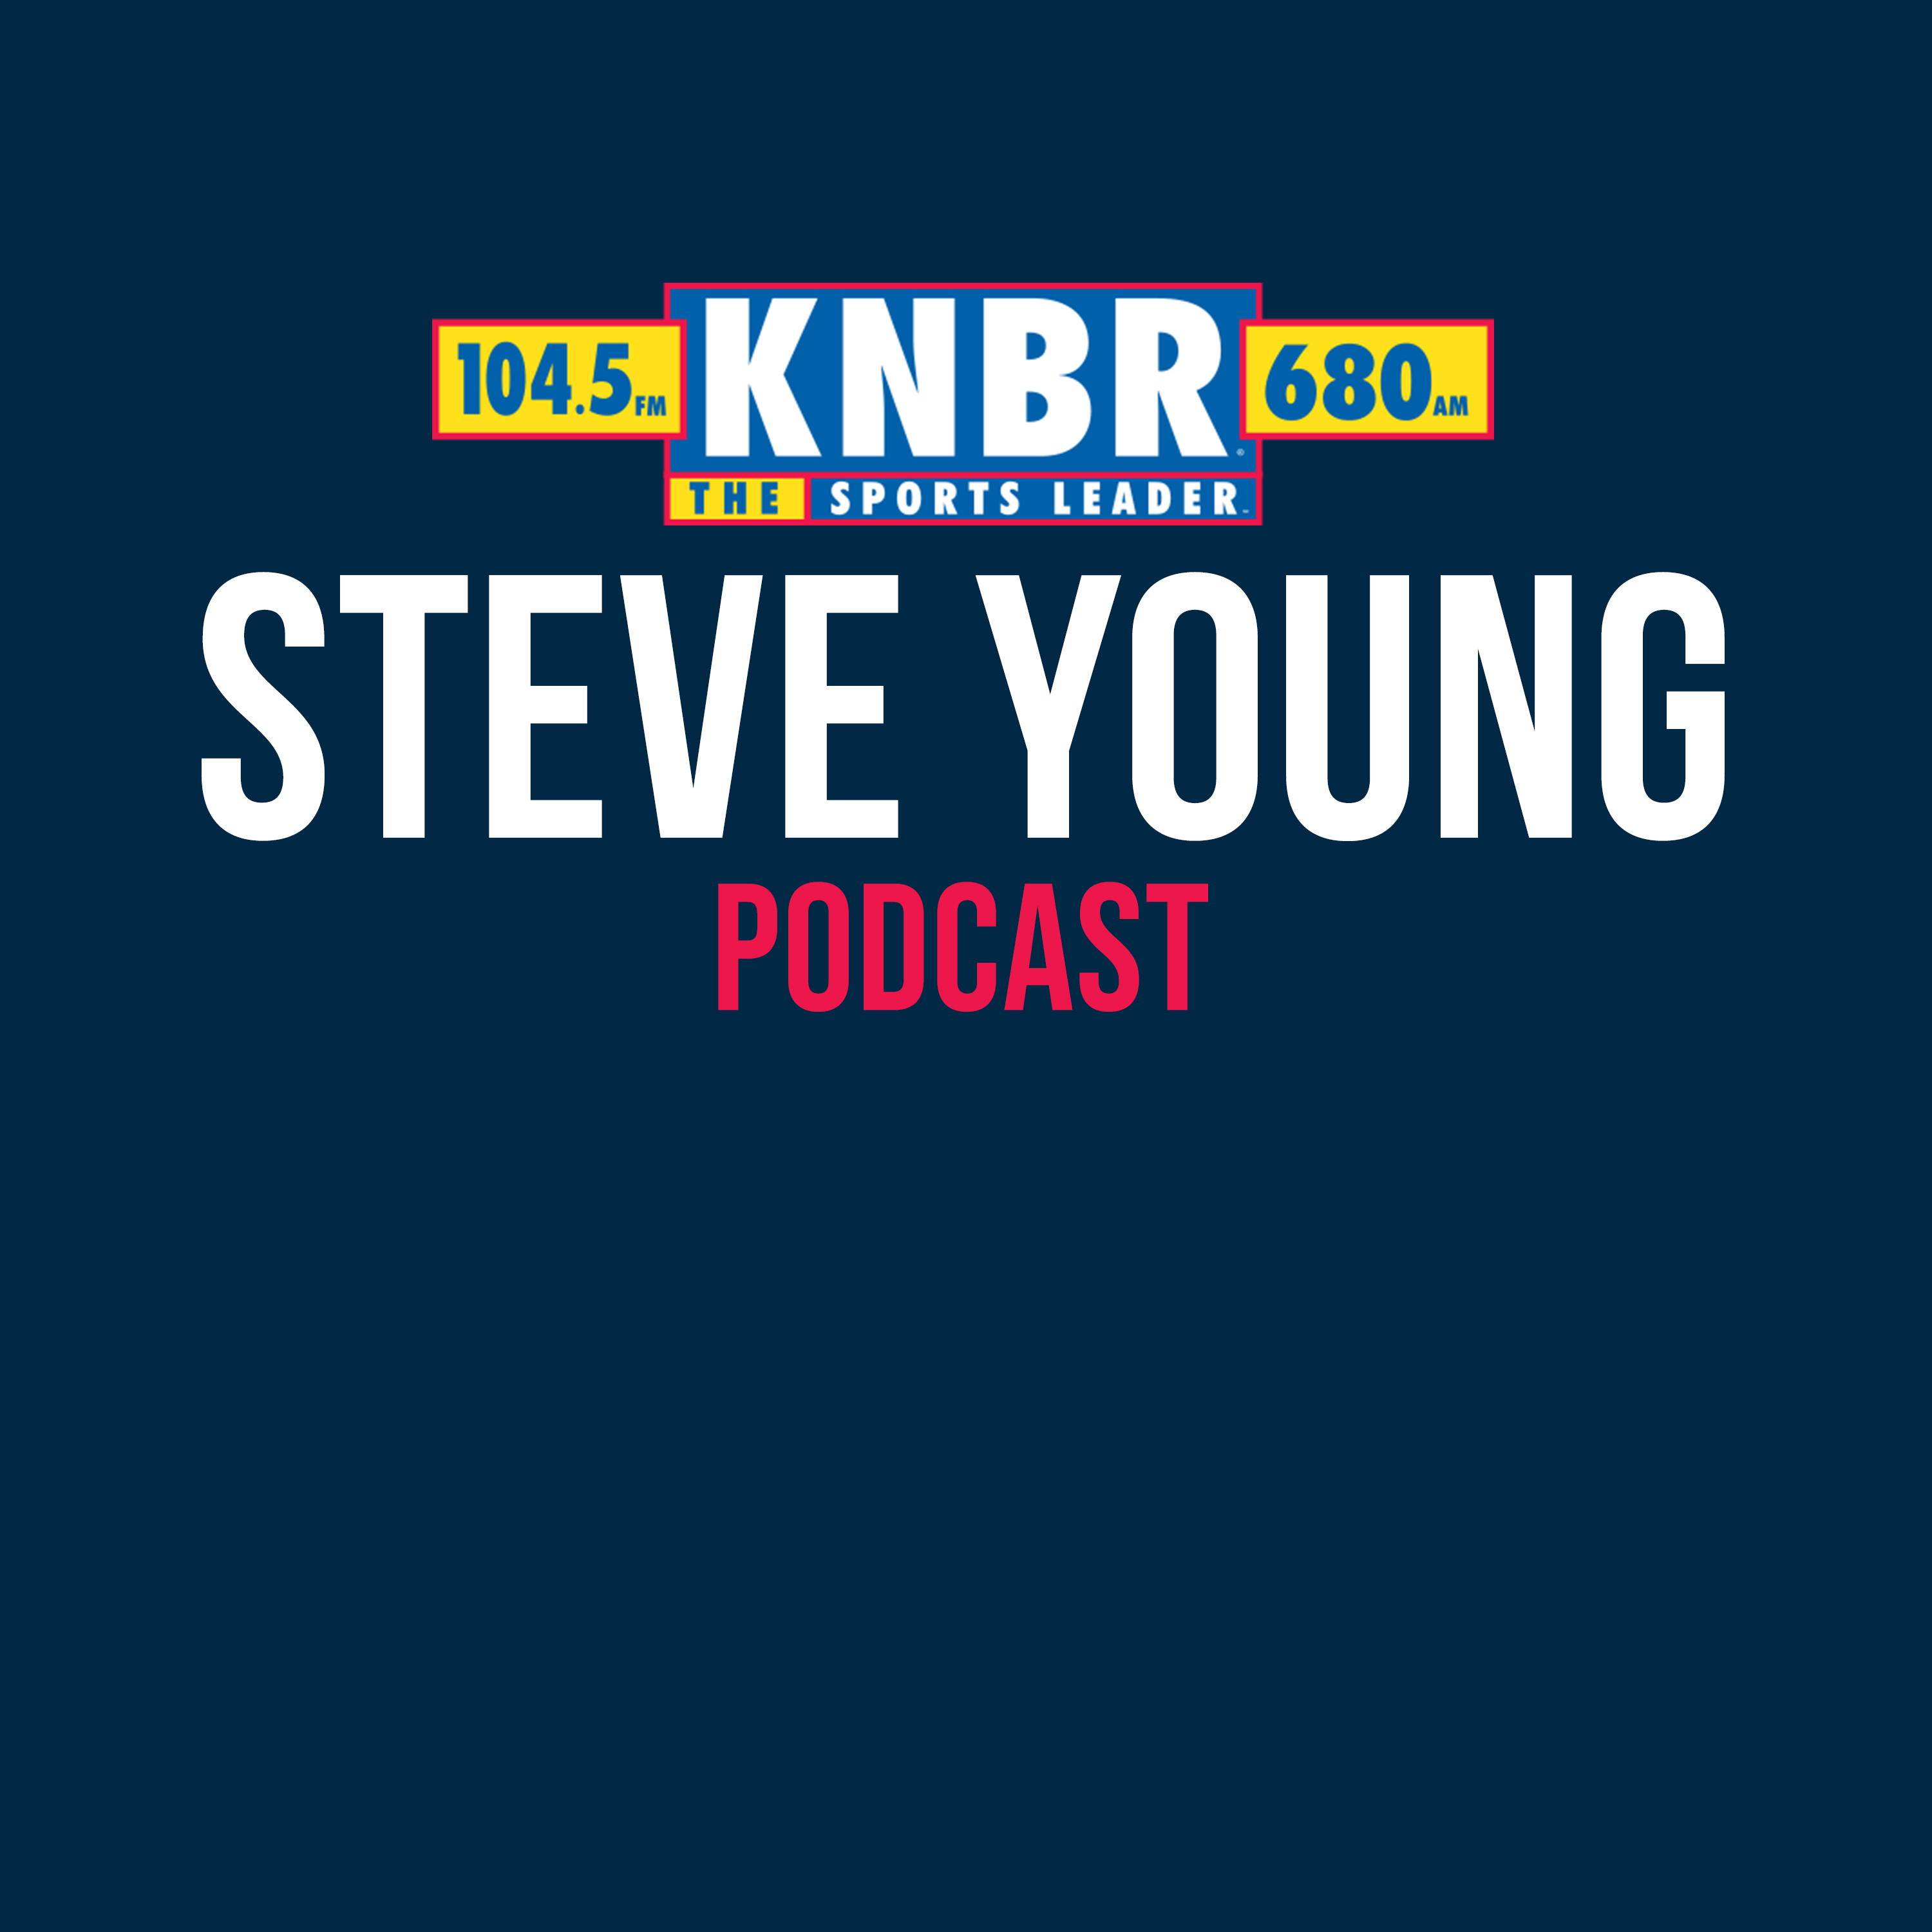 1-26 Steve Young expresses how impressed he is with the grit of Jimmy Garoppolo and the 49ers